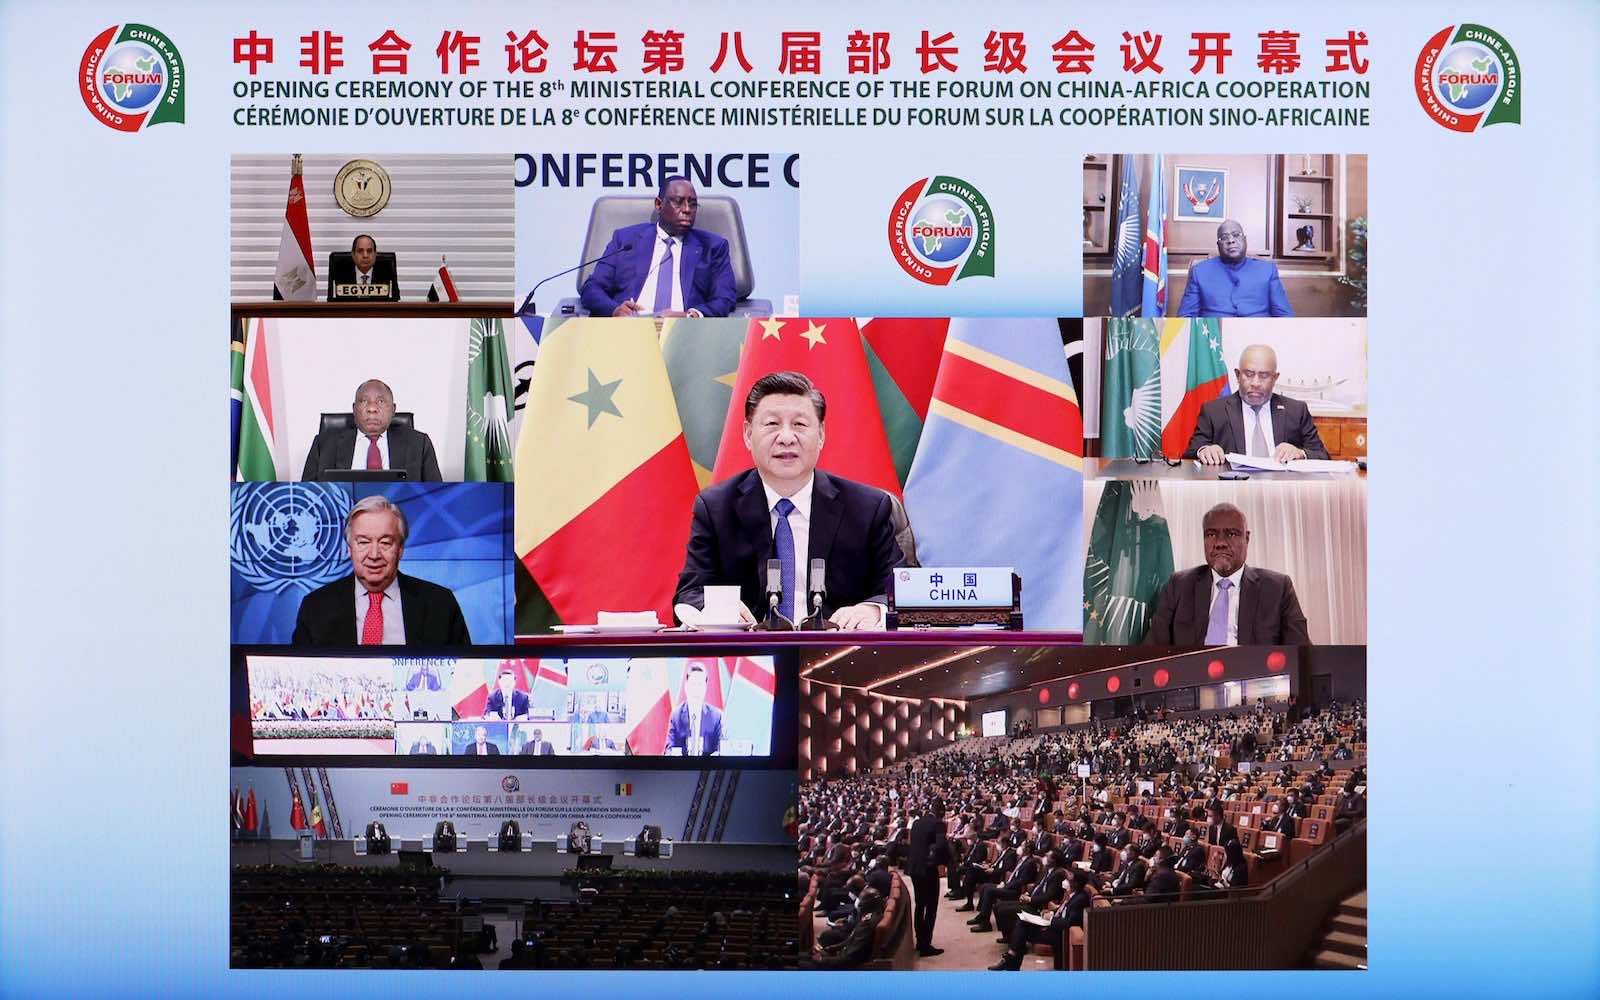 China’s President Xi Jinping speaking at the opening of the Forum on China-Africa Cooperation via video link from Beijing (Liu Bin/Xinhua via Getty Images)